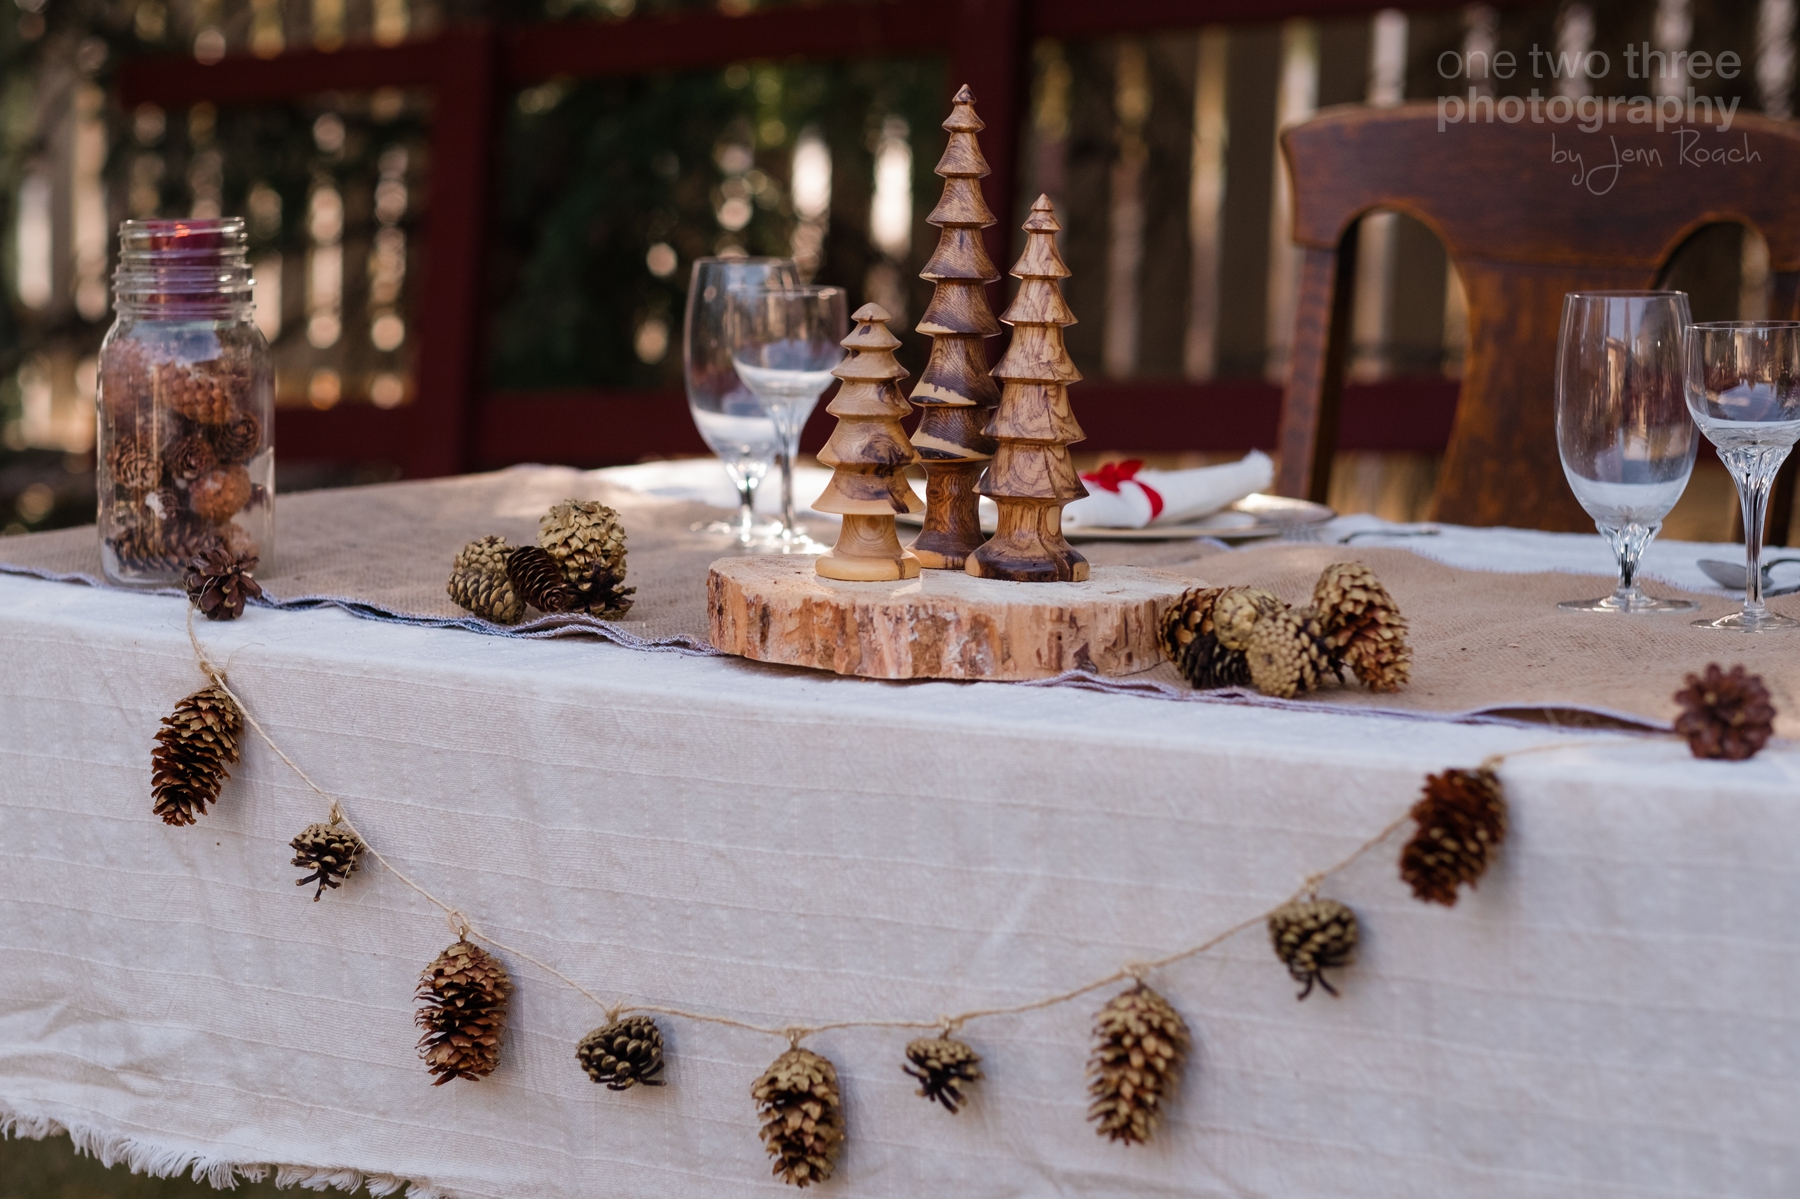 Rustic wedding table settings with pinecones and wood place settings